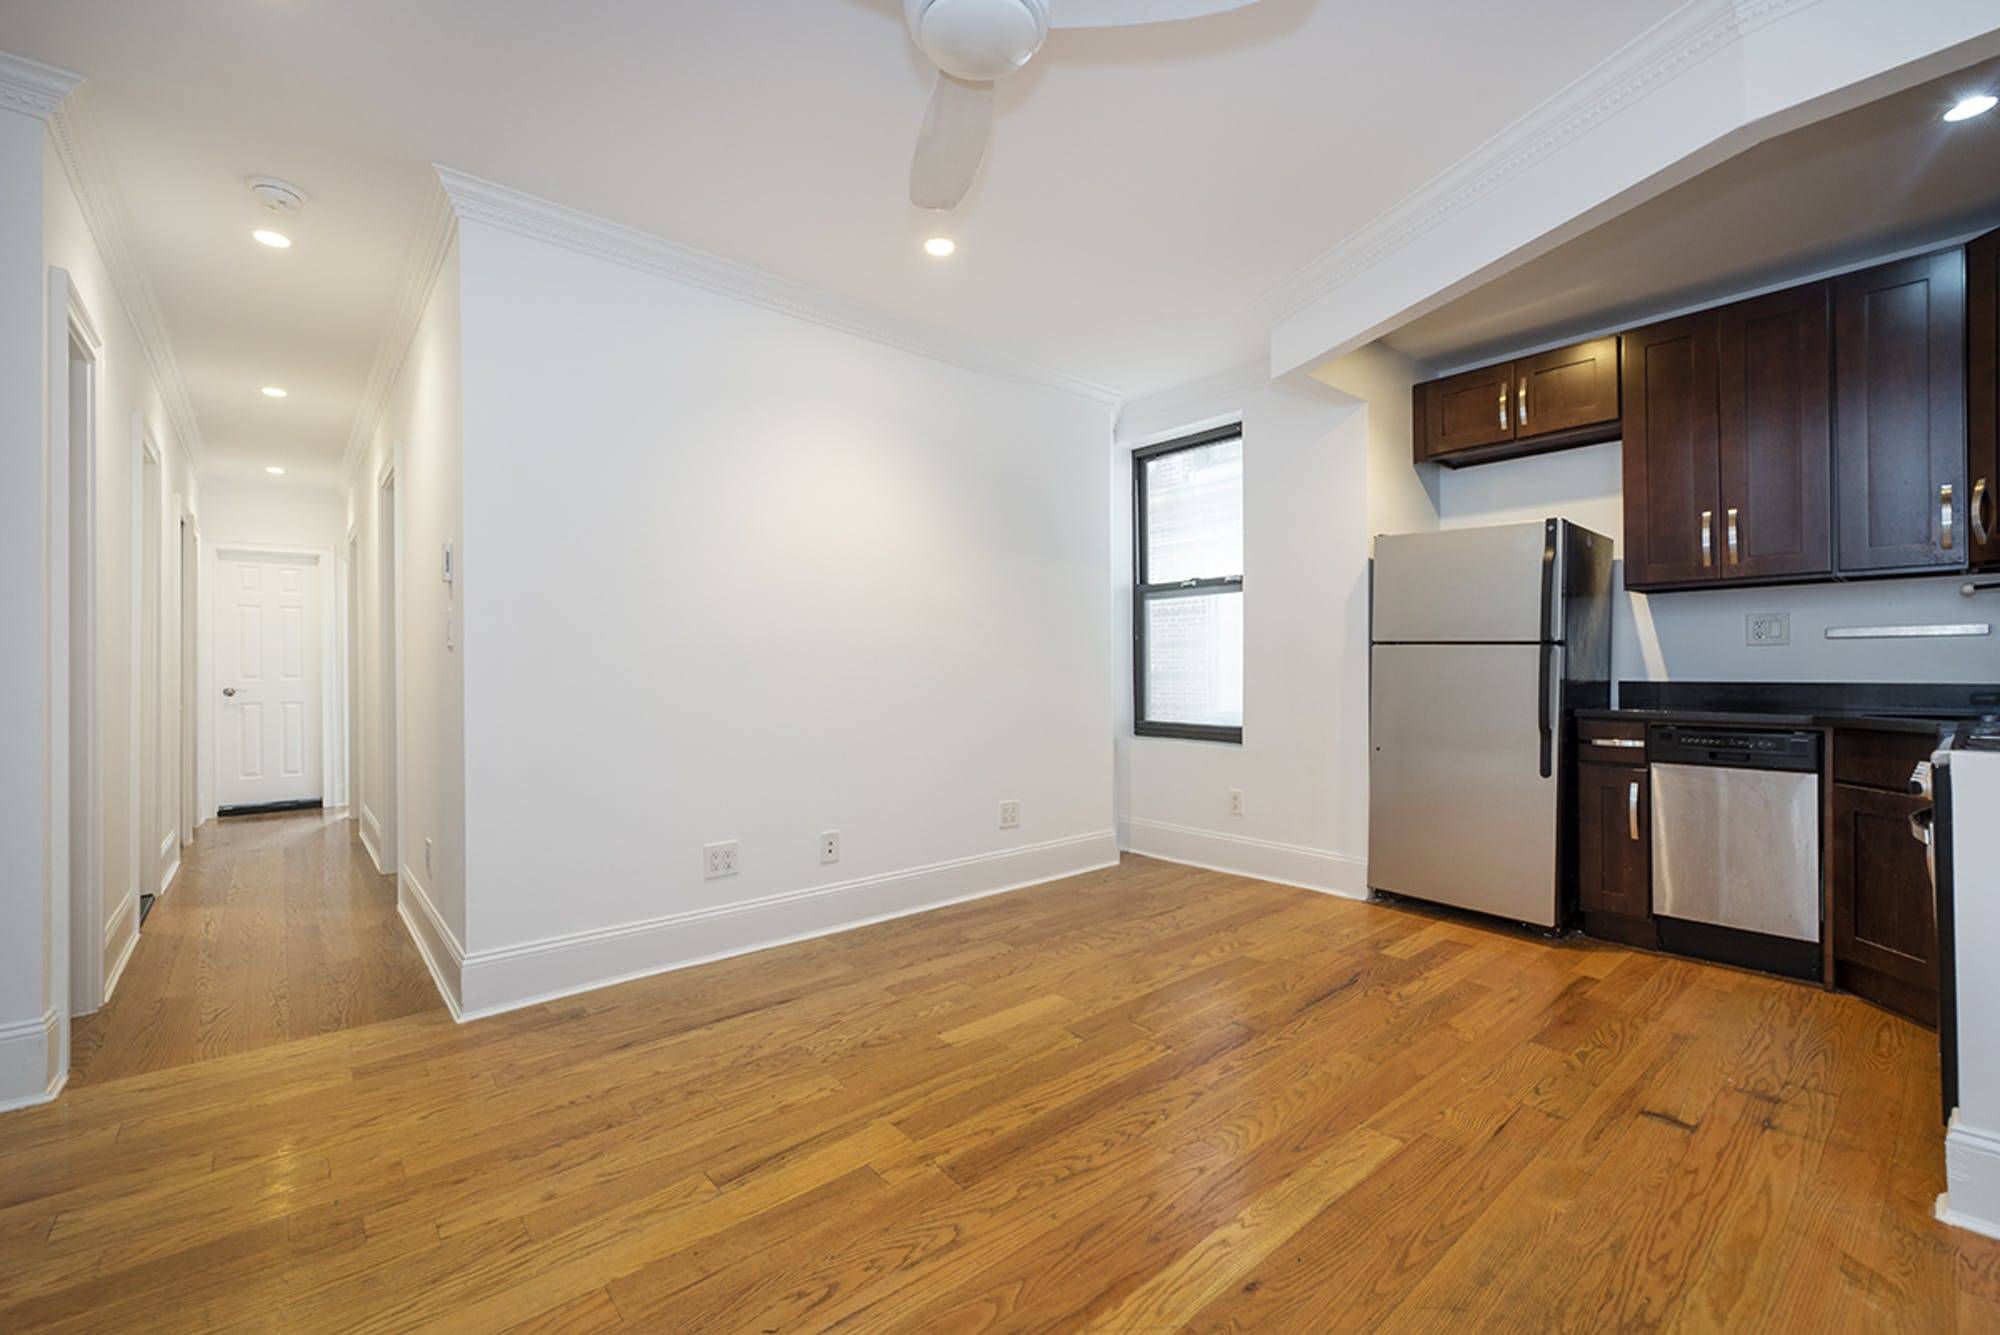 Welcome to 1059 Union Street 1059 Union Street is a collective of renovated apartments, pridefully overlooking Prospect Park in prime Crown Heights.